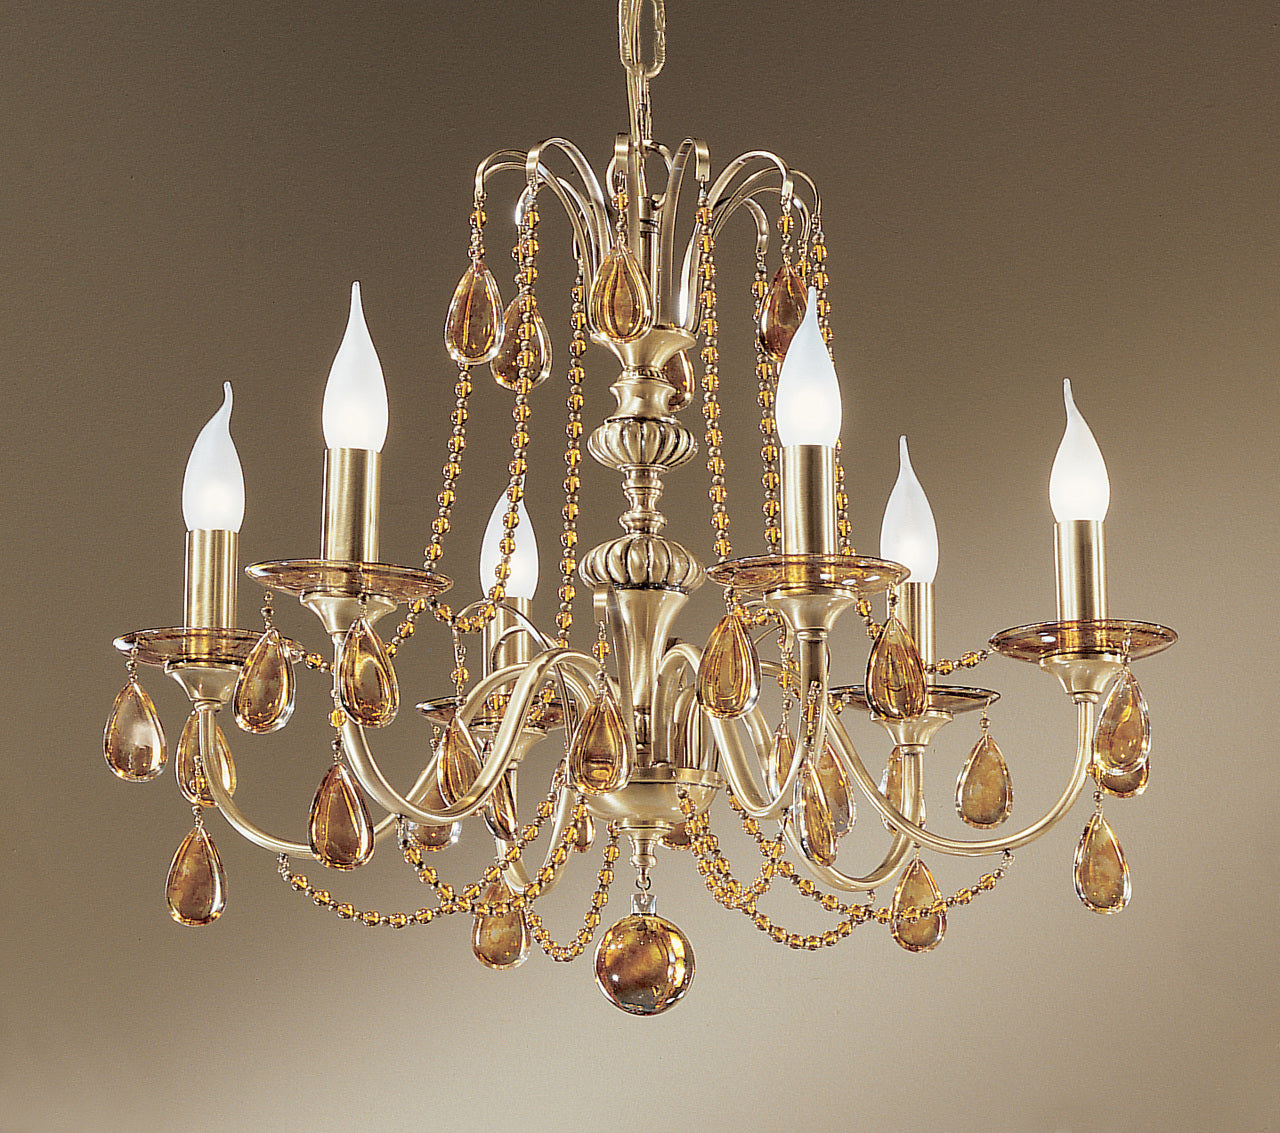 Classic Lighting 1226 FBR OTS Brussels Crystal Chandelier in Flemish Bronze (Imported from Spain)